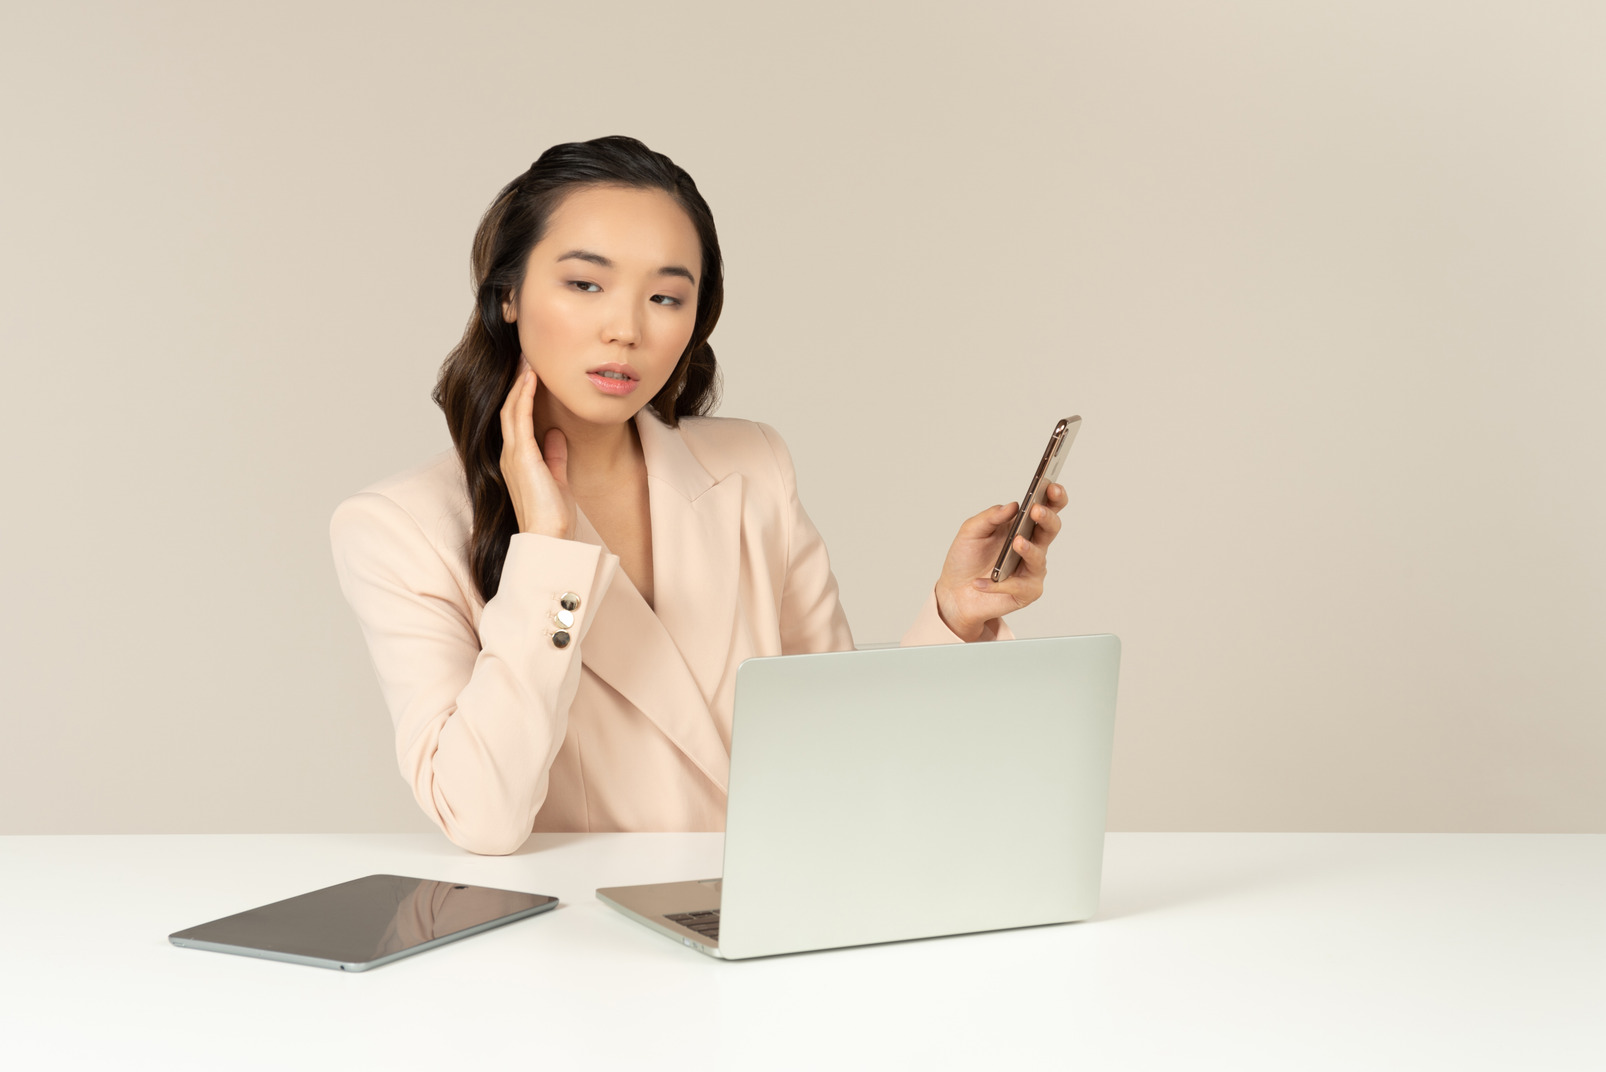 Asian female office employee checking phone